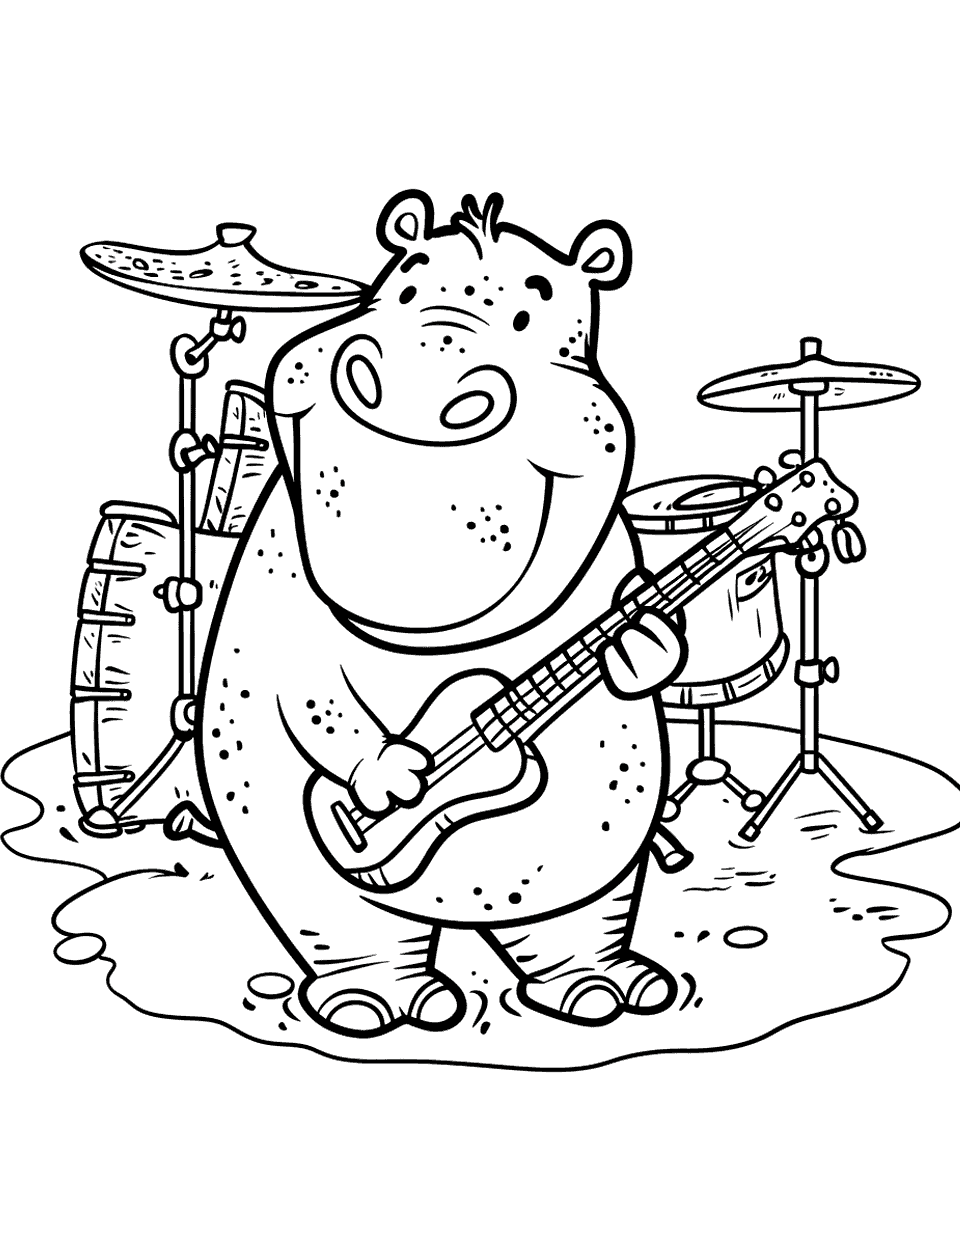 Hippo Music Band Coloring Page - Hippo playing guitar in a band concert.